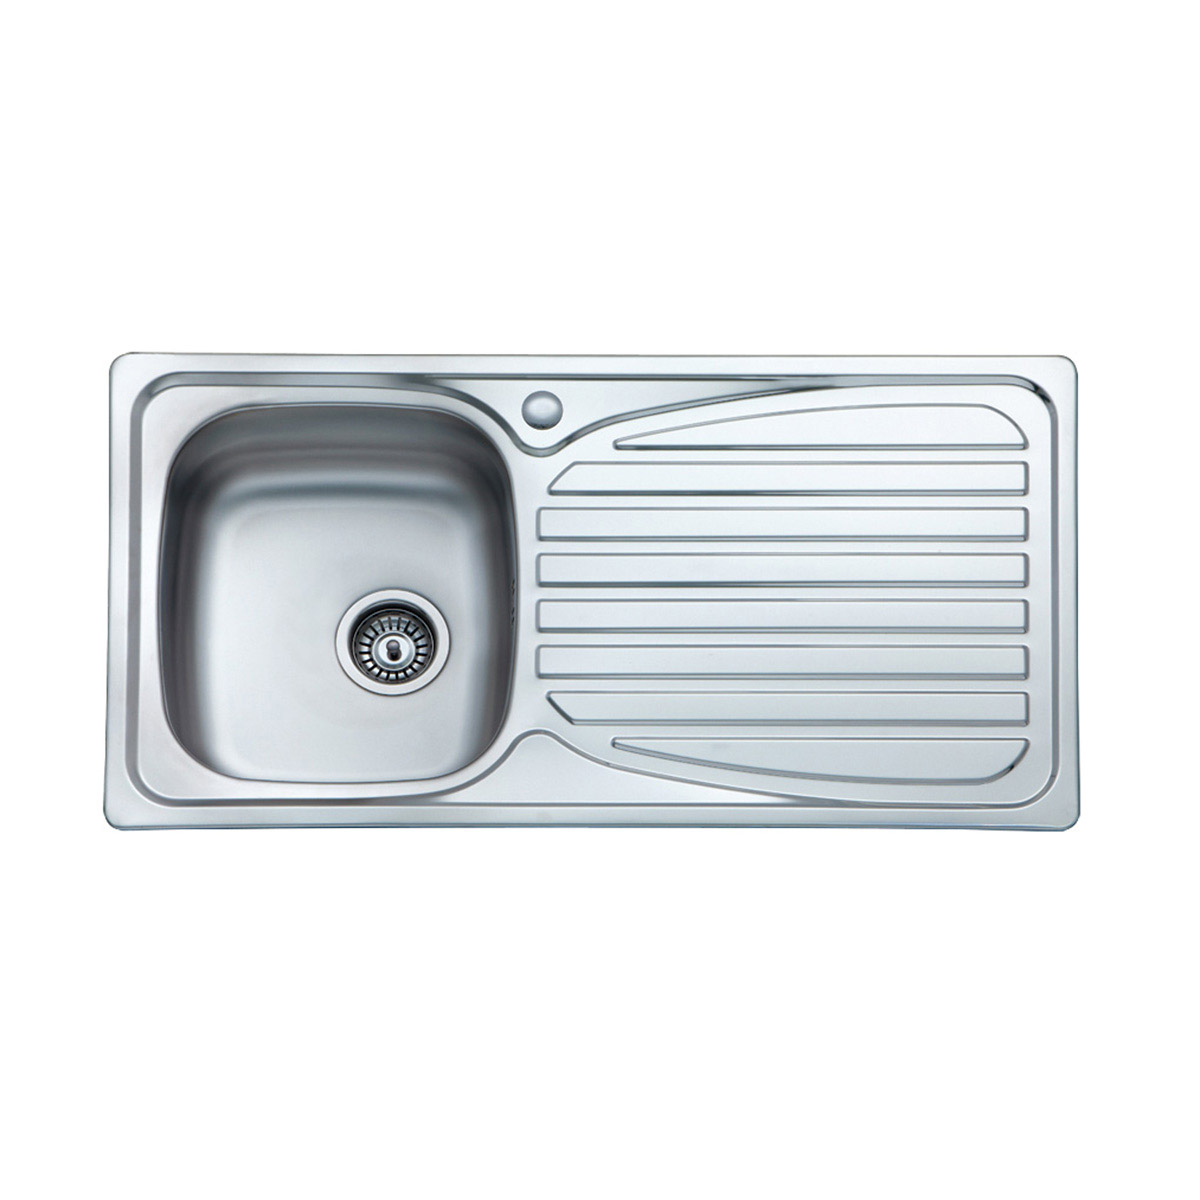 Eirline Single bowl sink with drainer 950 x 500mm